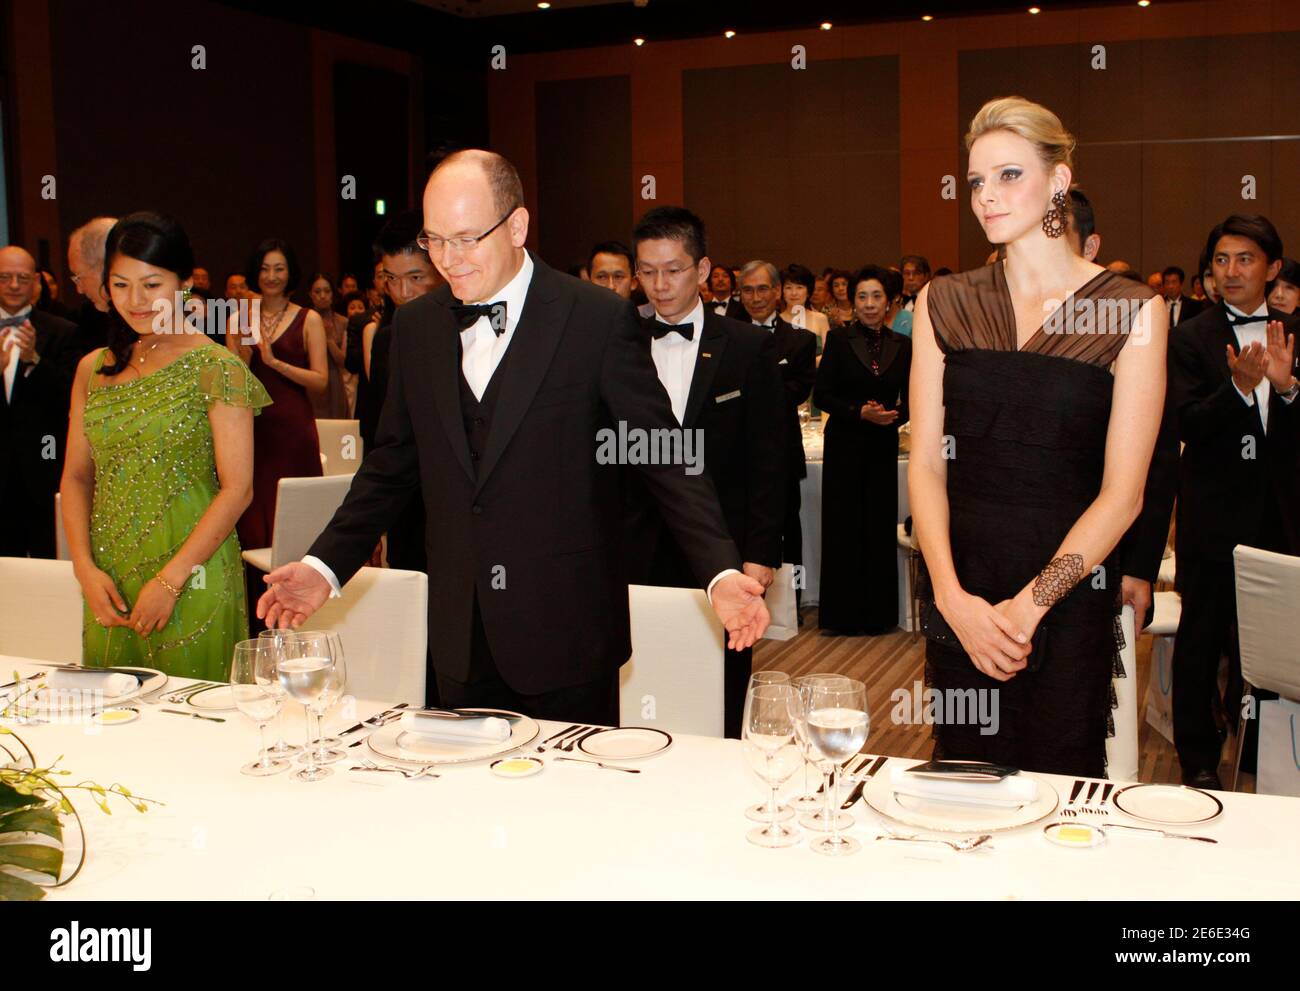 RPA ONLY : Monaco's Prince Albert II (C) and his fiancee Charlene Wittstock (R) arrive at a gala dinner hosted by BirdLife International in Tokyo October 29, 2010. REUTERS/Issei Kato (JAPAN - Tags: ROYALS SOCIETY) Stock Photo